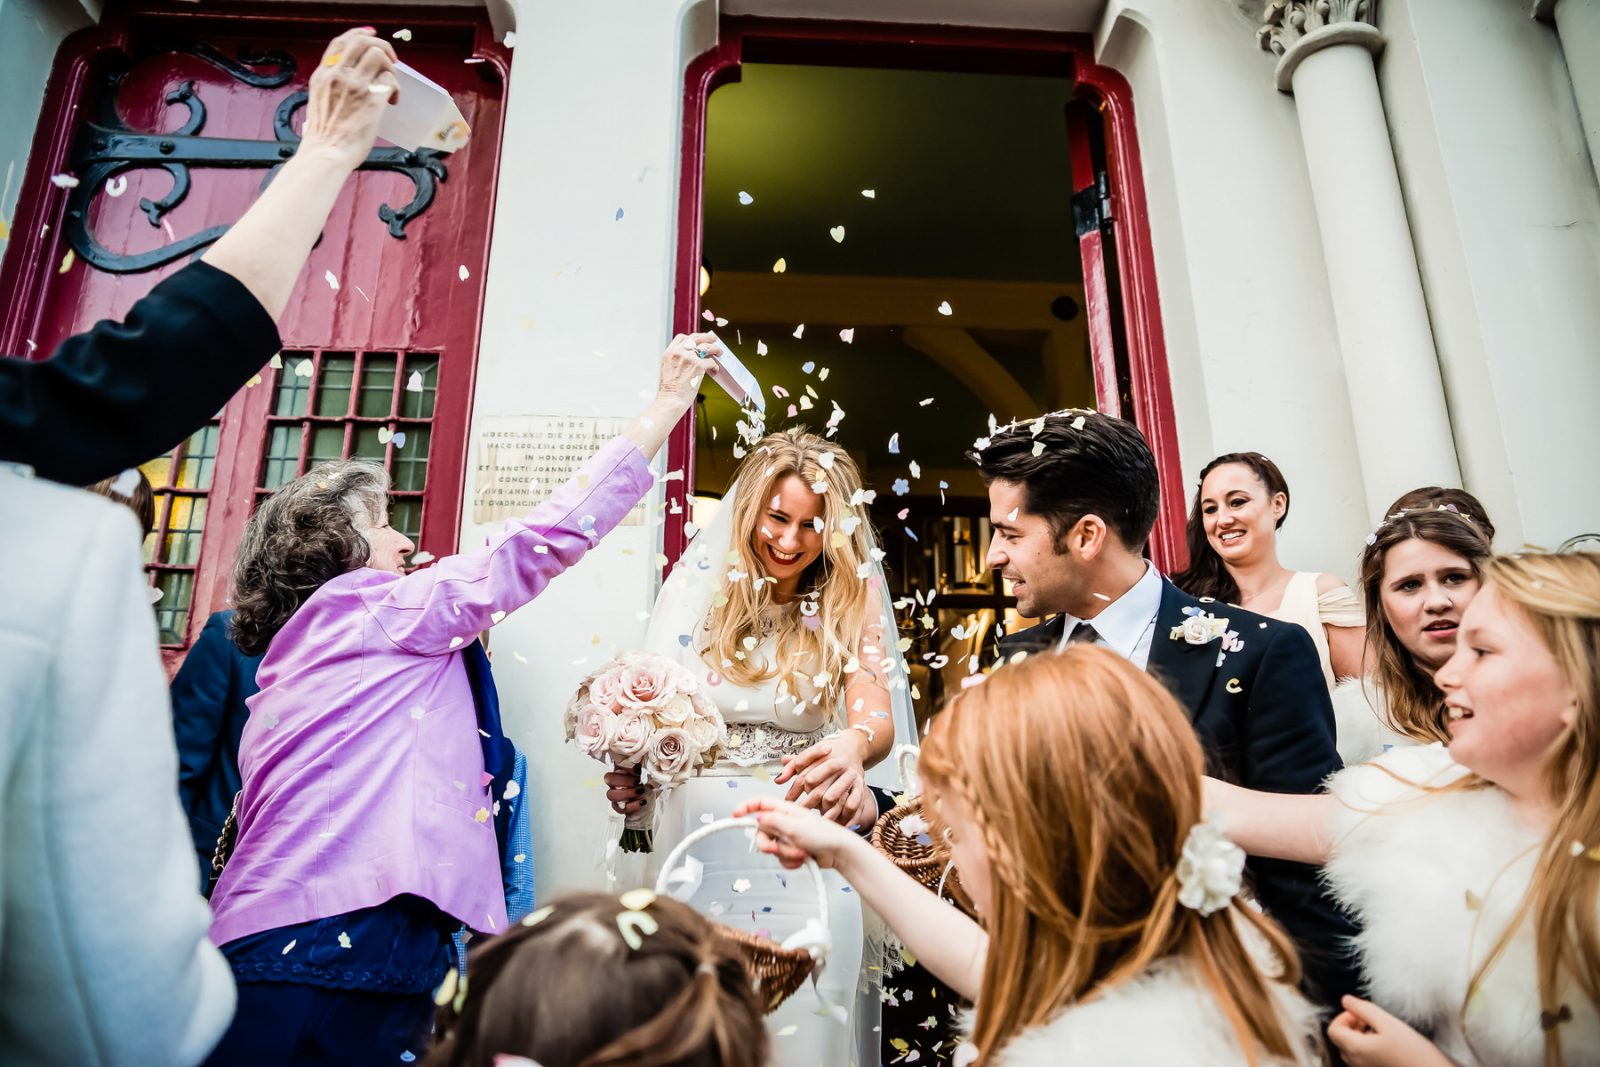 Bride and Groom leaving church with confetti being thrown